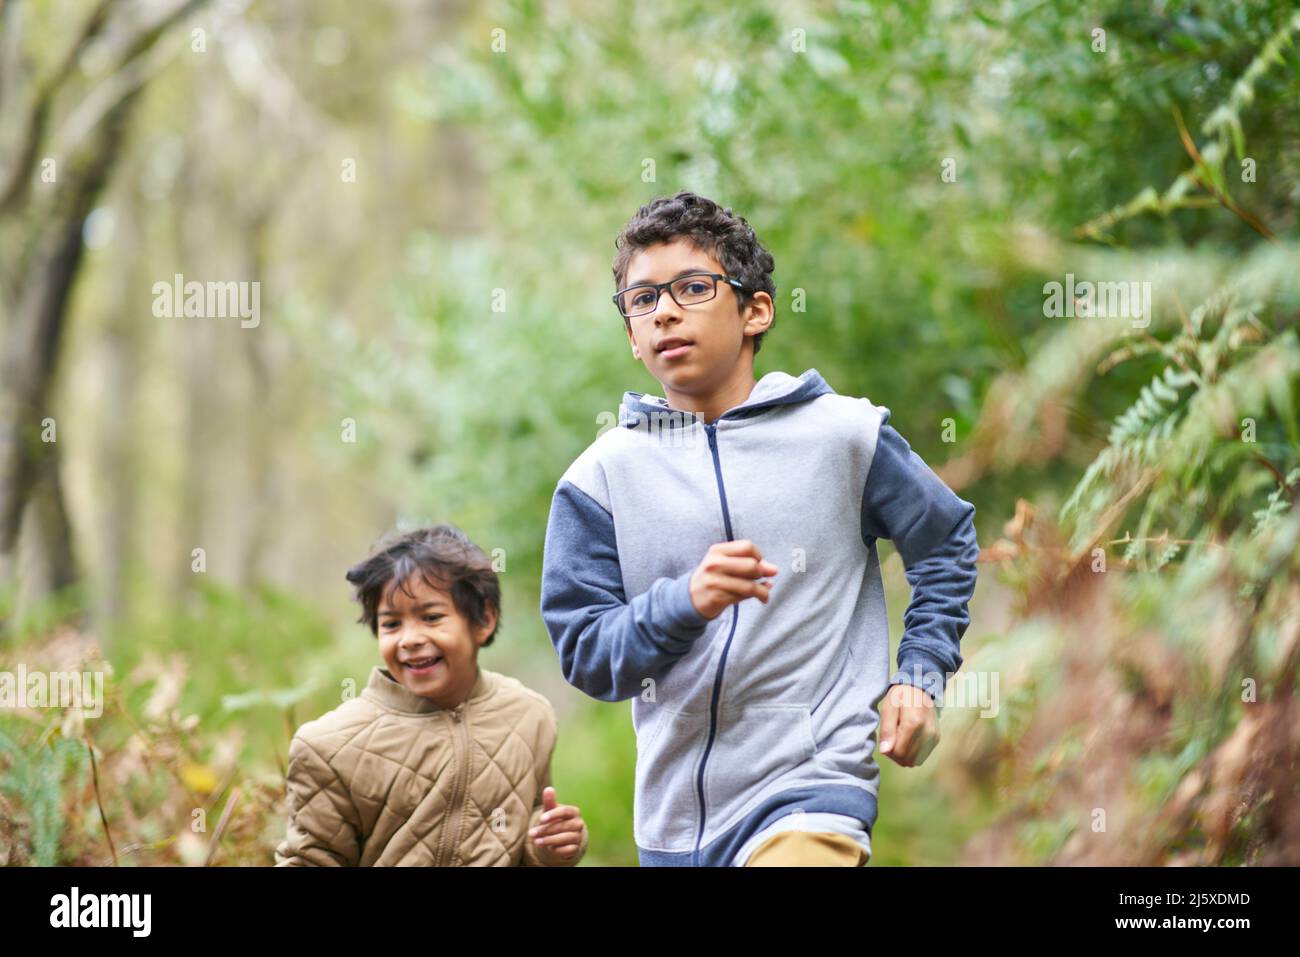 Brothers running together in woods Stock Photo